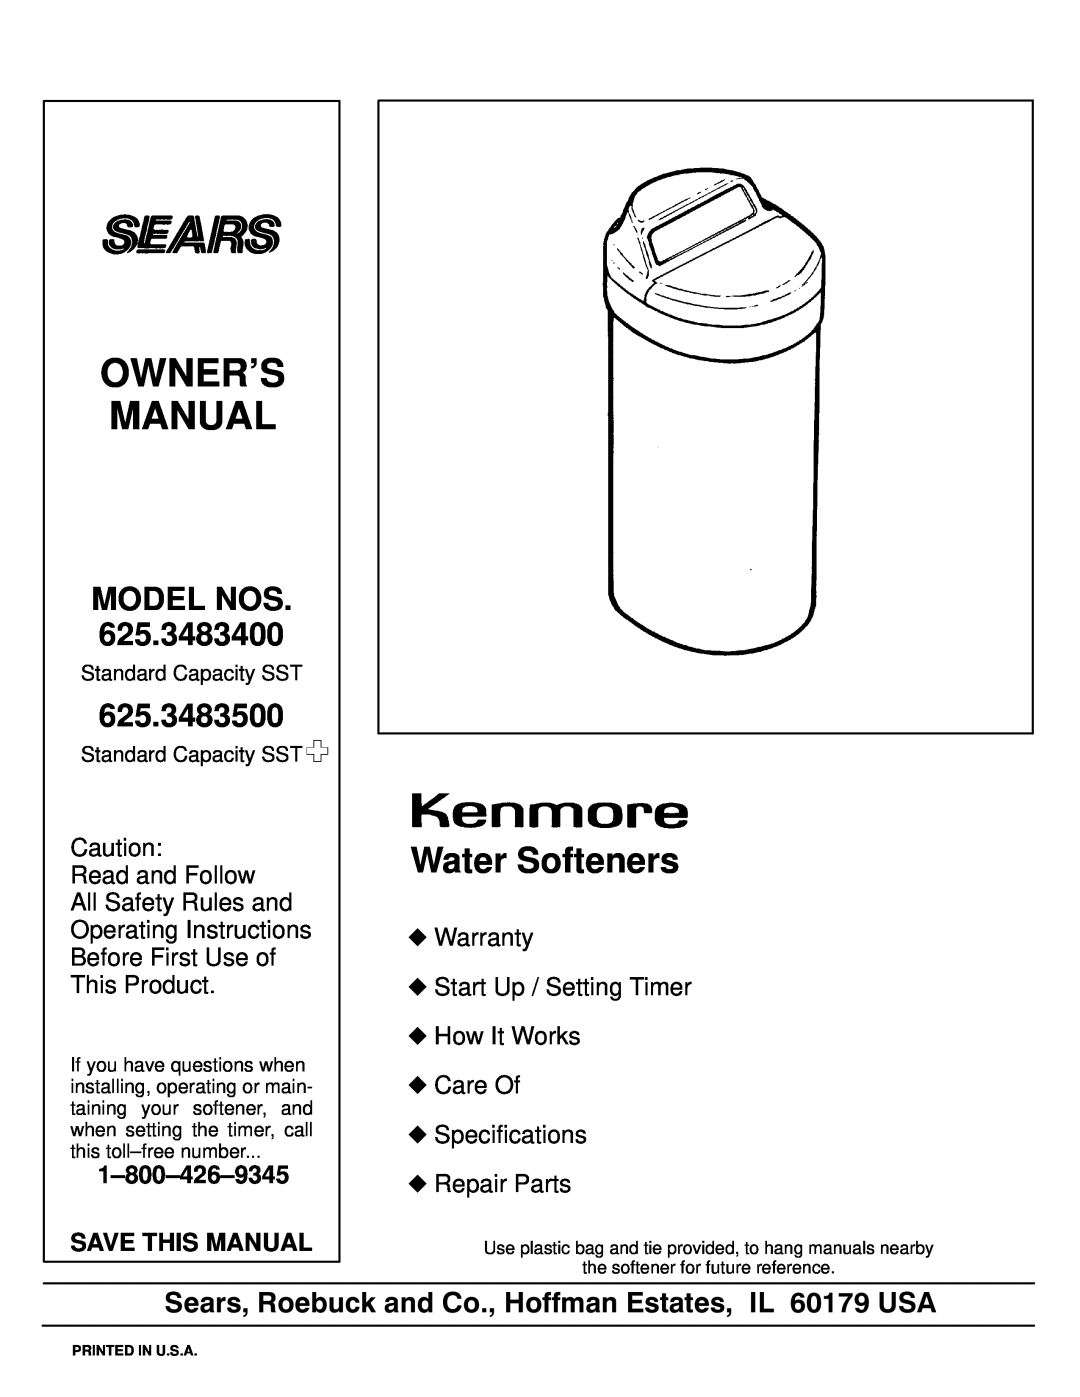 Kenmore 625.3483500 owner manual Water Softeners, Model Nos, Owners Manual, Before First Use of This Product, Repair Parts 